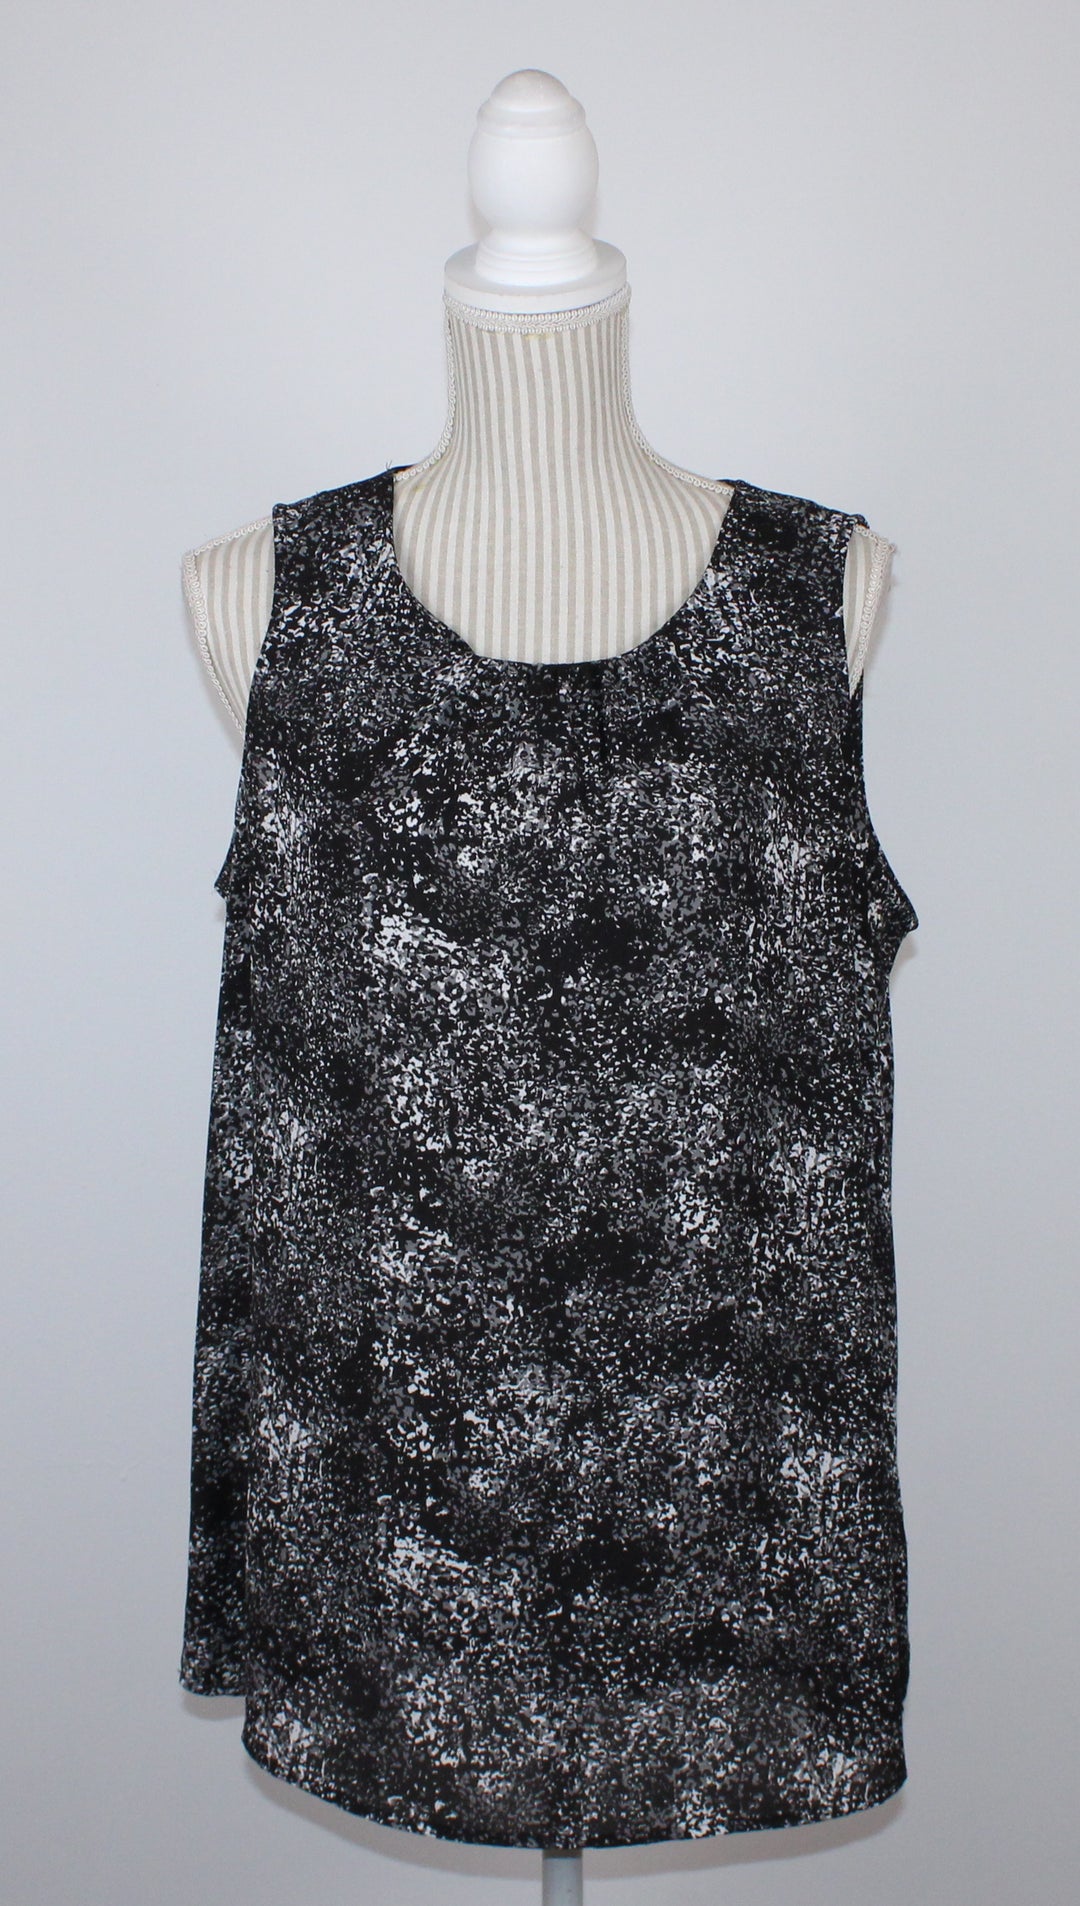 NORTHERN REFLECTIONS BLACK & WHITE S/L TOP LADIES LARGE EUC